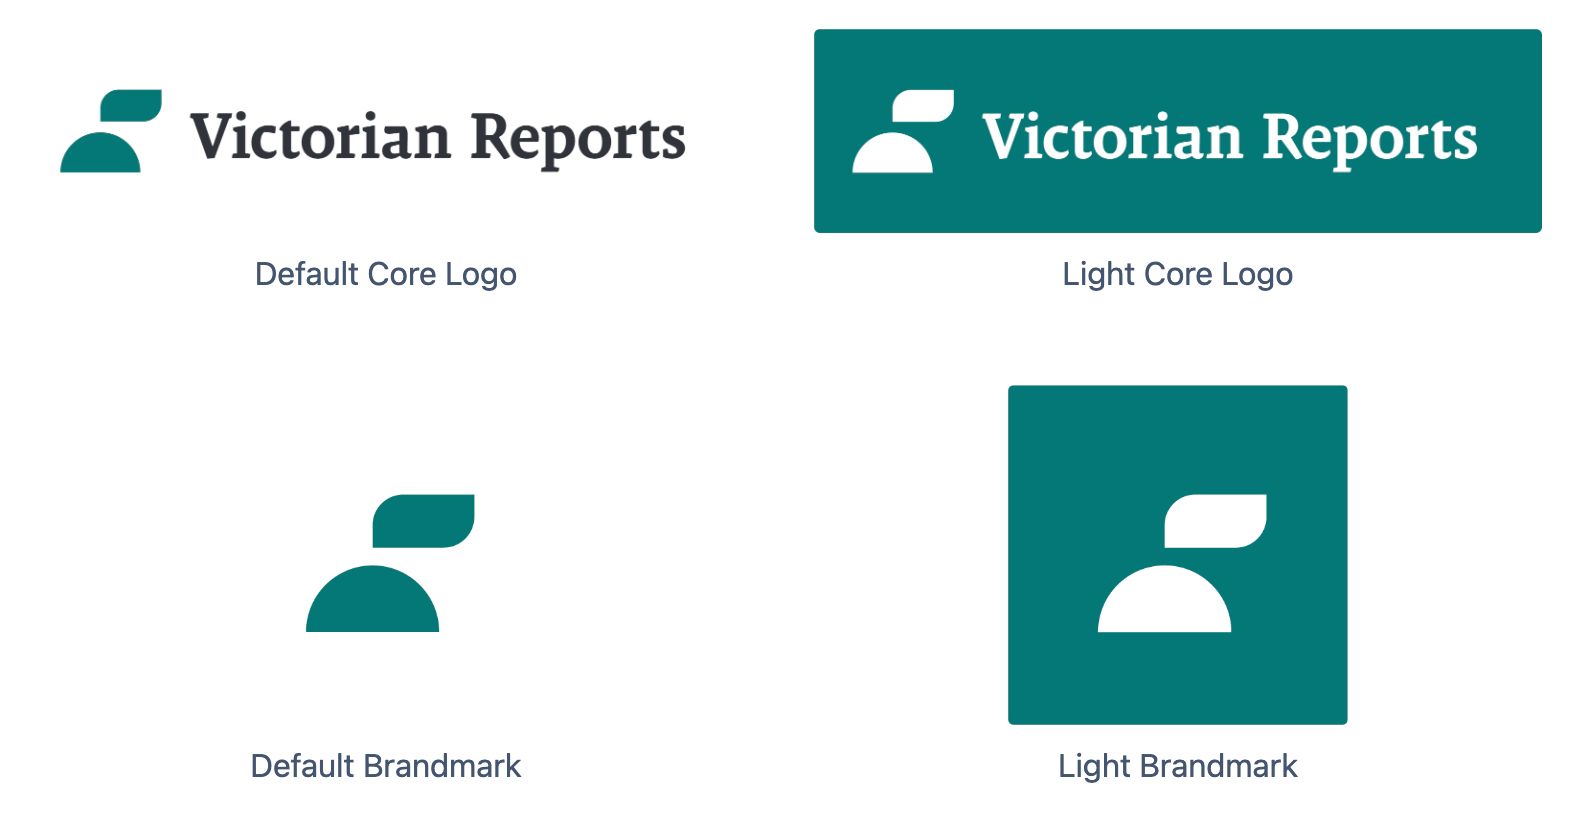 Victorian Reports logo redesign